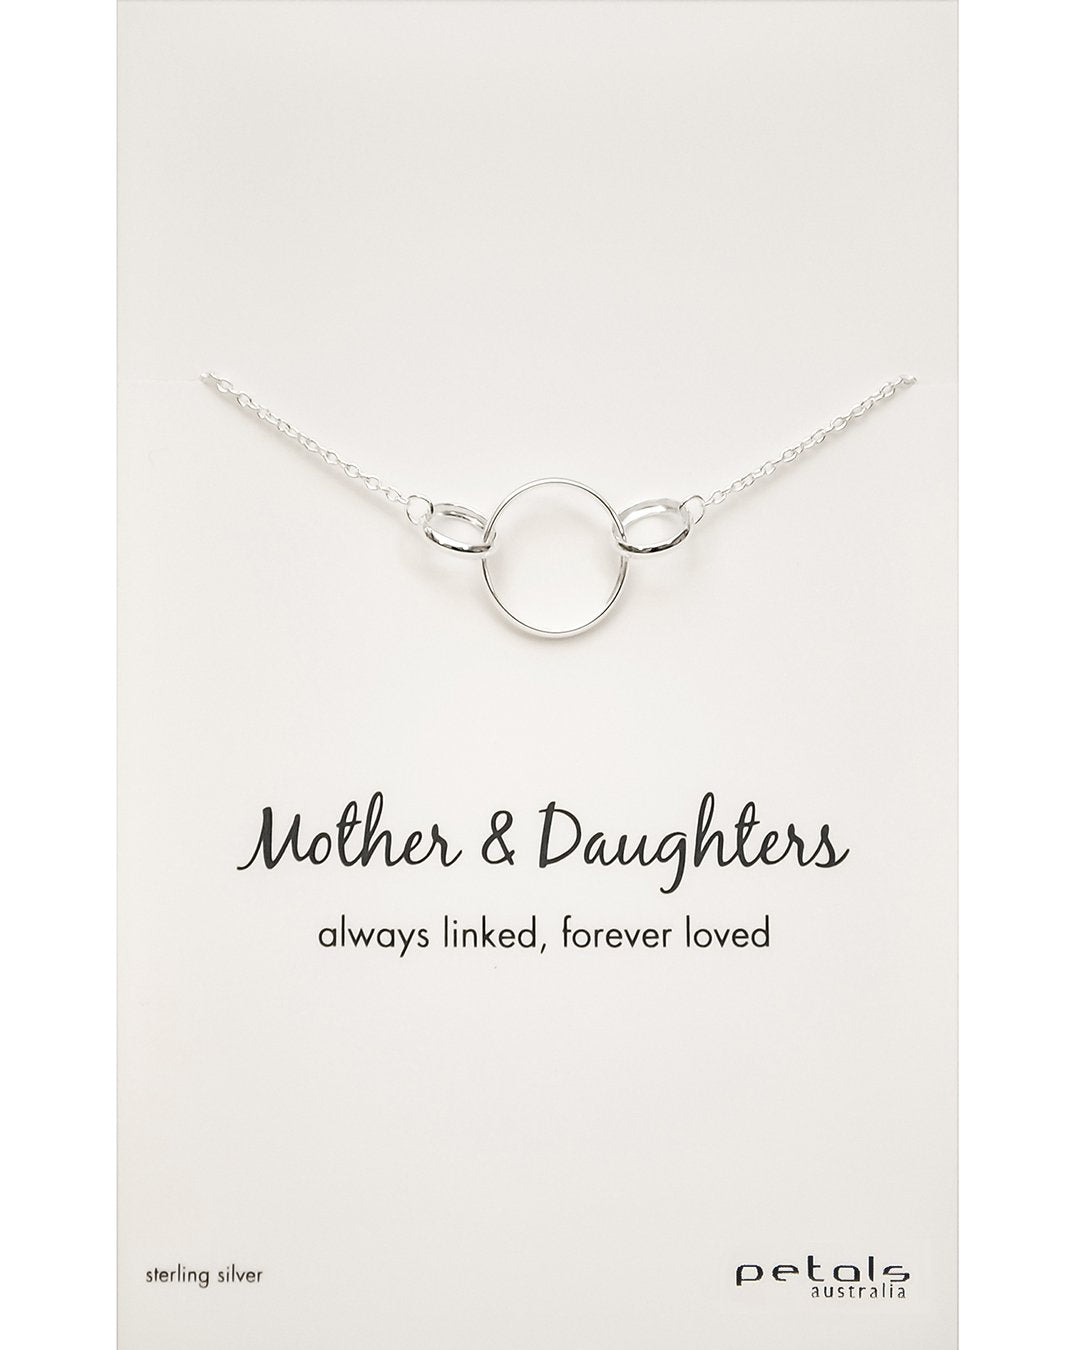 Classic Triple Circle Mother & Daughhters Necklace